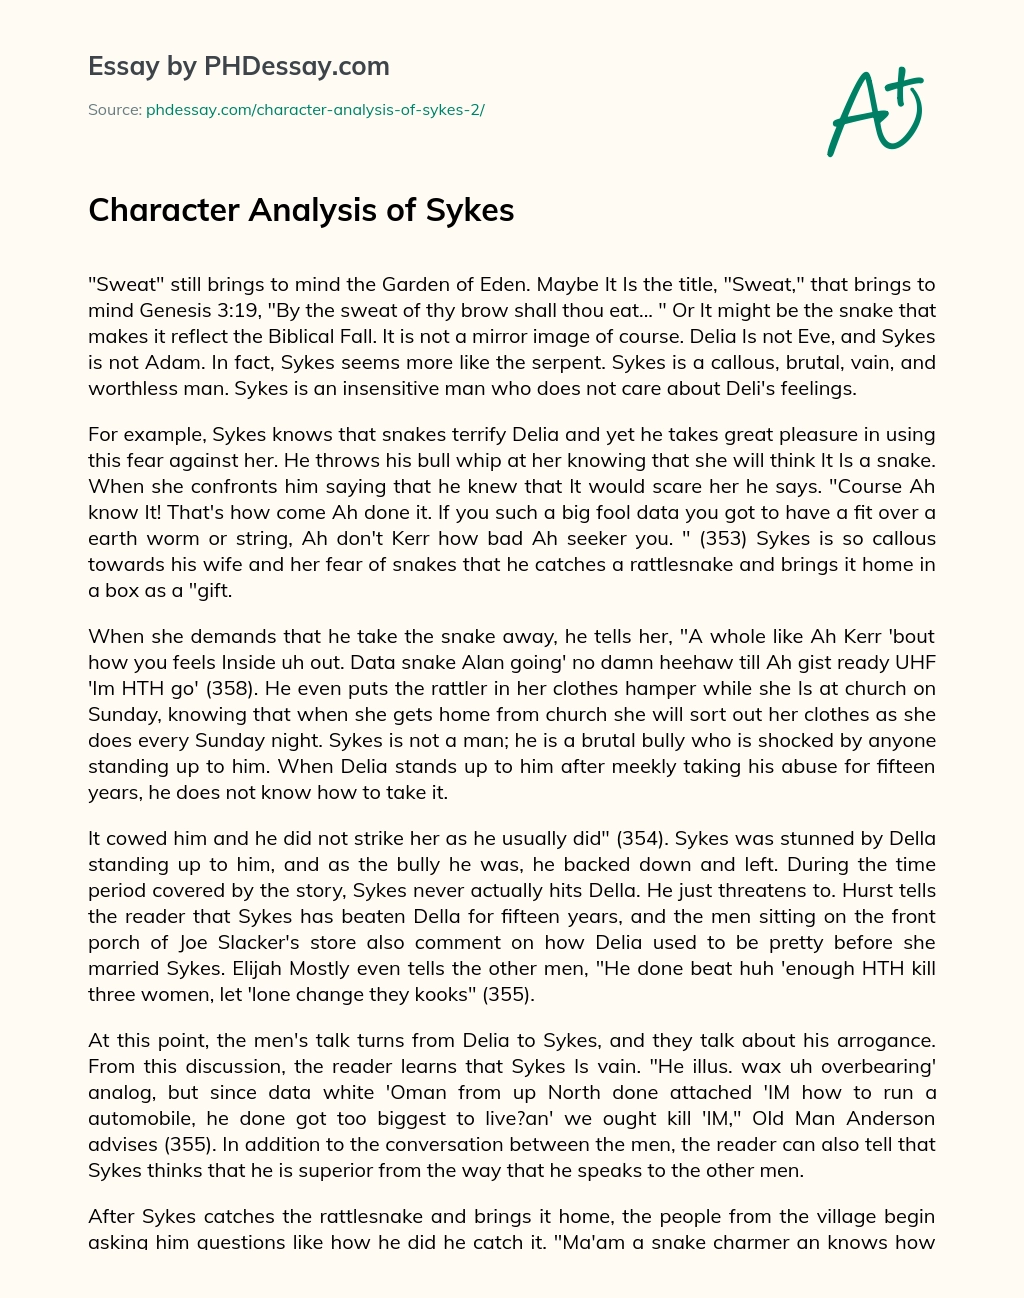 Character Analysis of Sykes essay